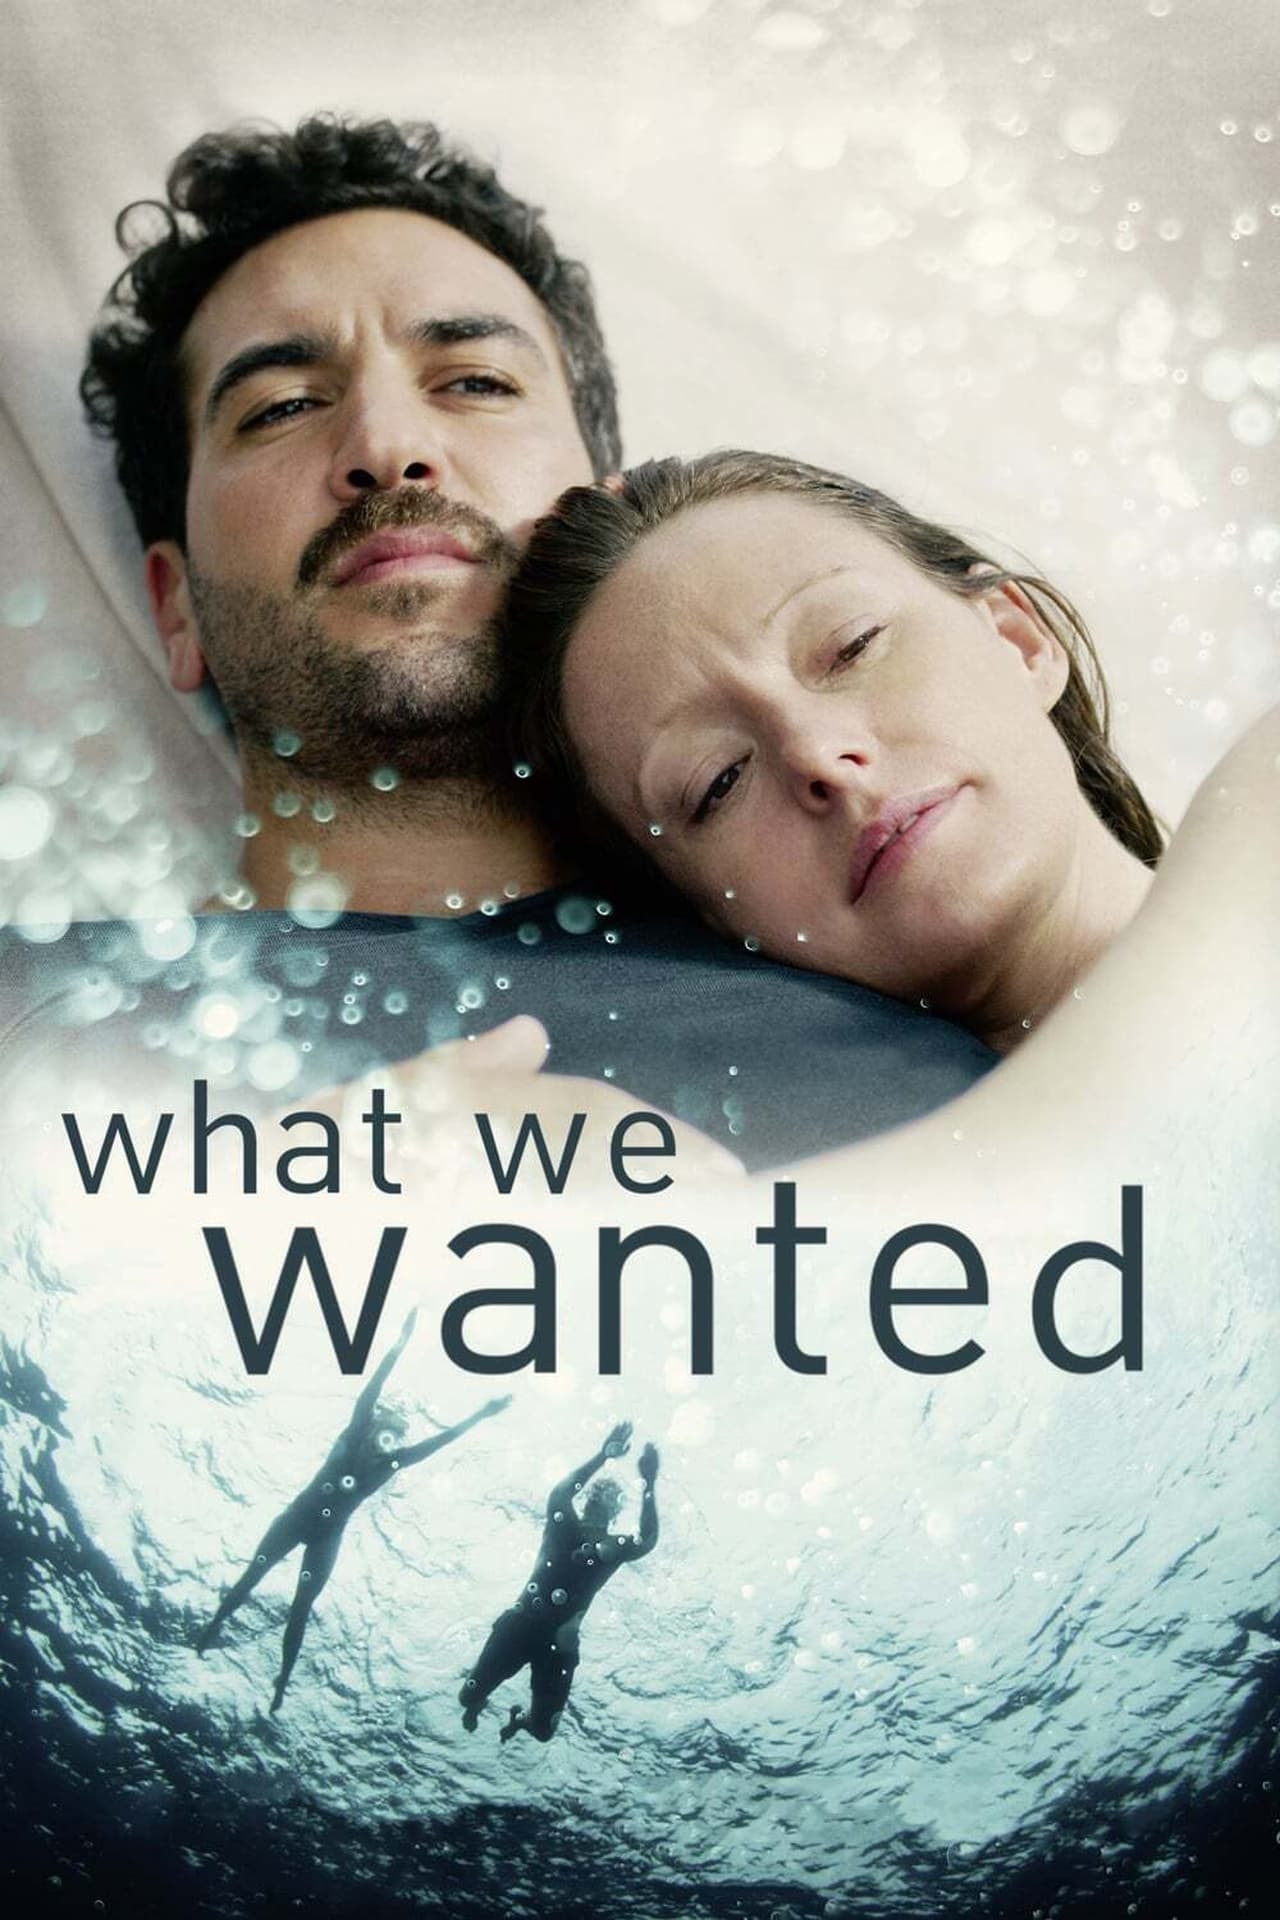 What We Wanted (2020) 640Kbps 24Fps 48Khz 5.1Ch DD+ NF E-AC3 Turkish Audio TAC